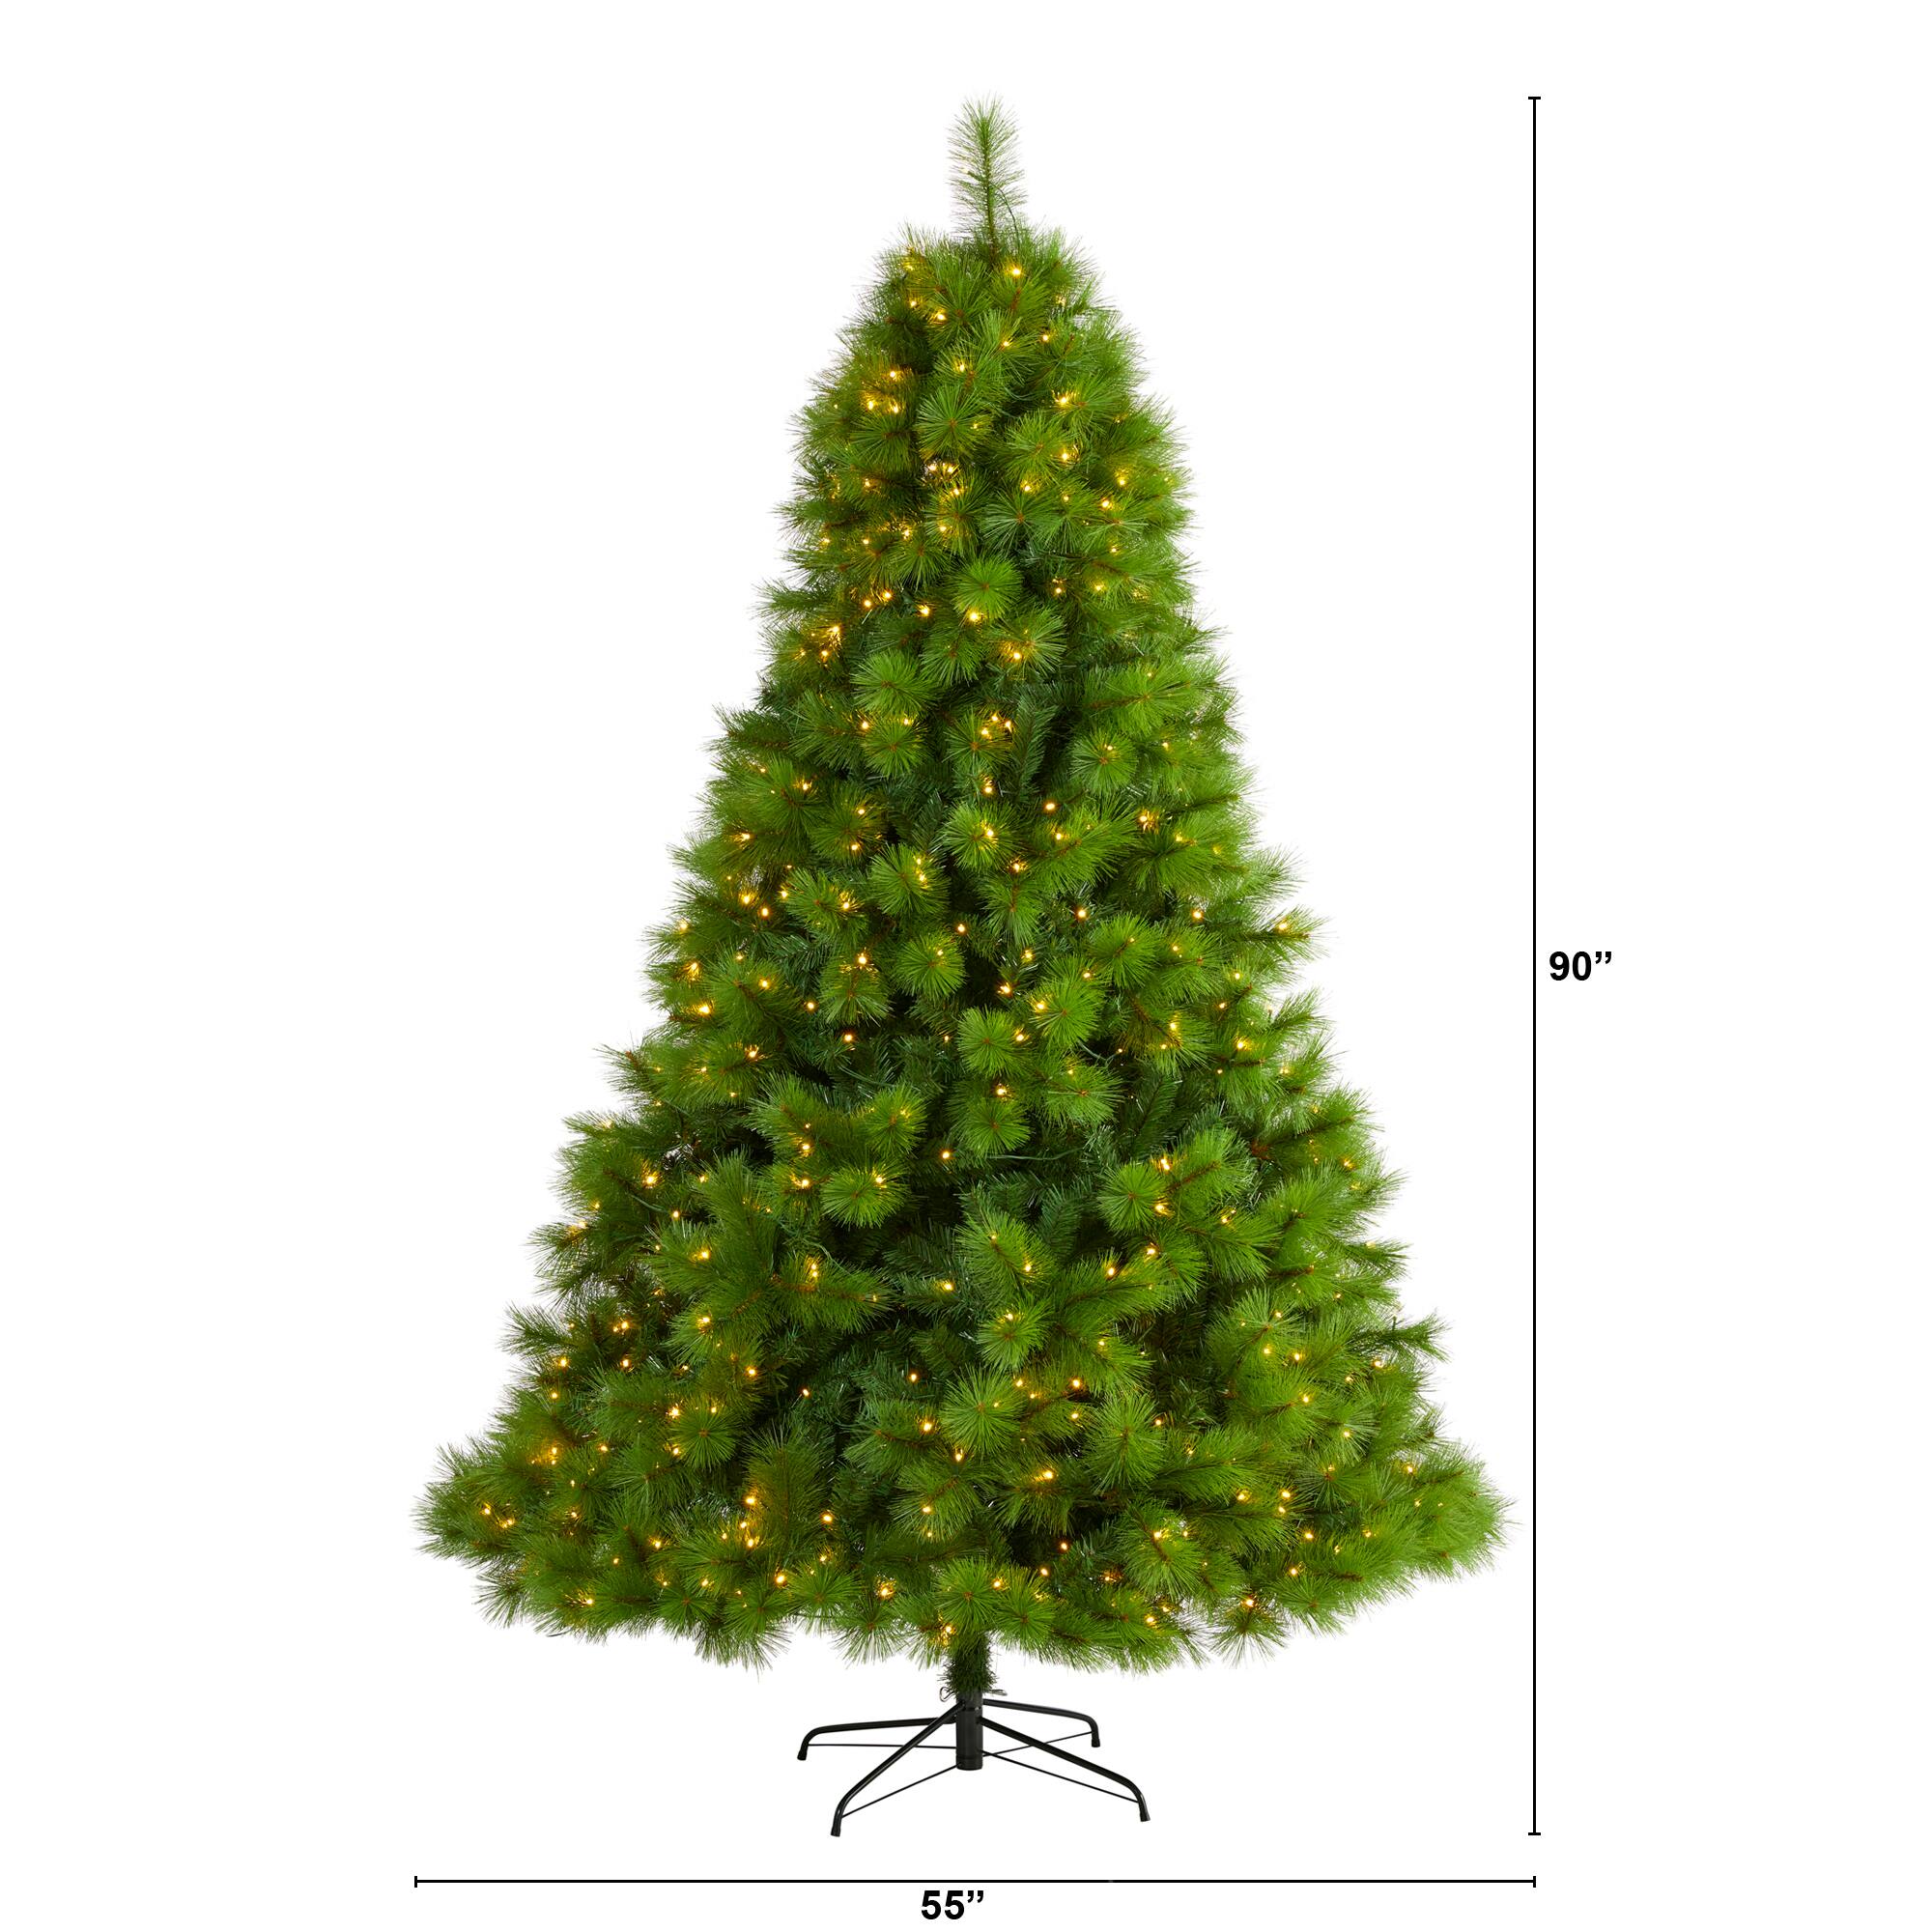 7.5ft. Pre-lit Green Scotch Pine Artificial Christmas Tree with Clear LED Lights